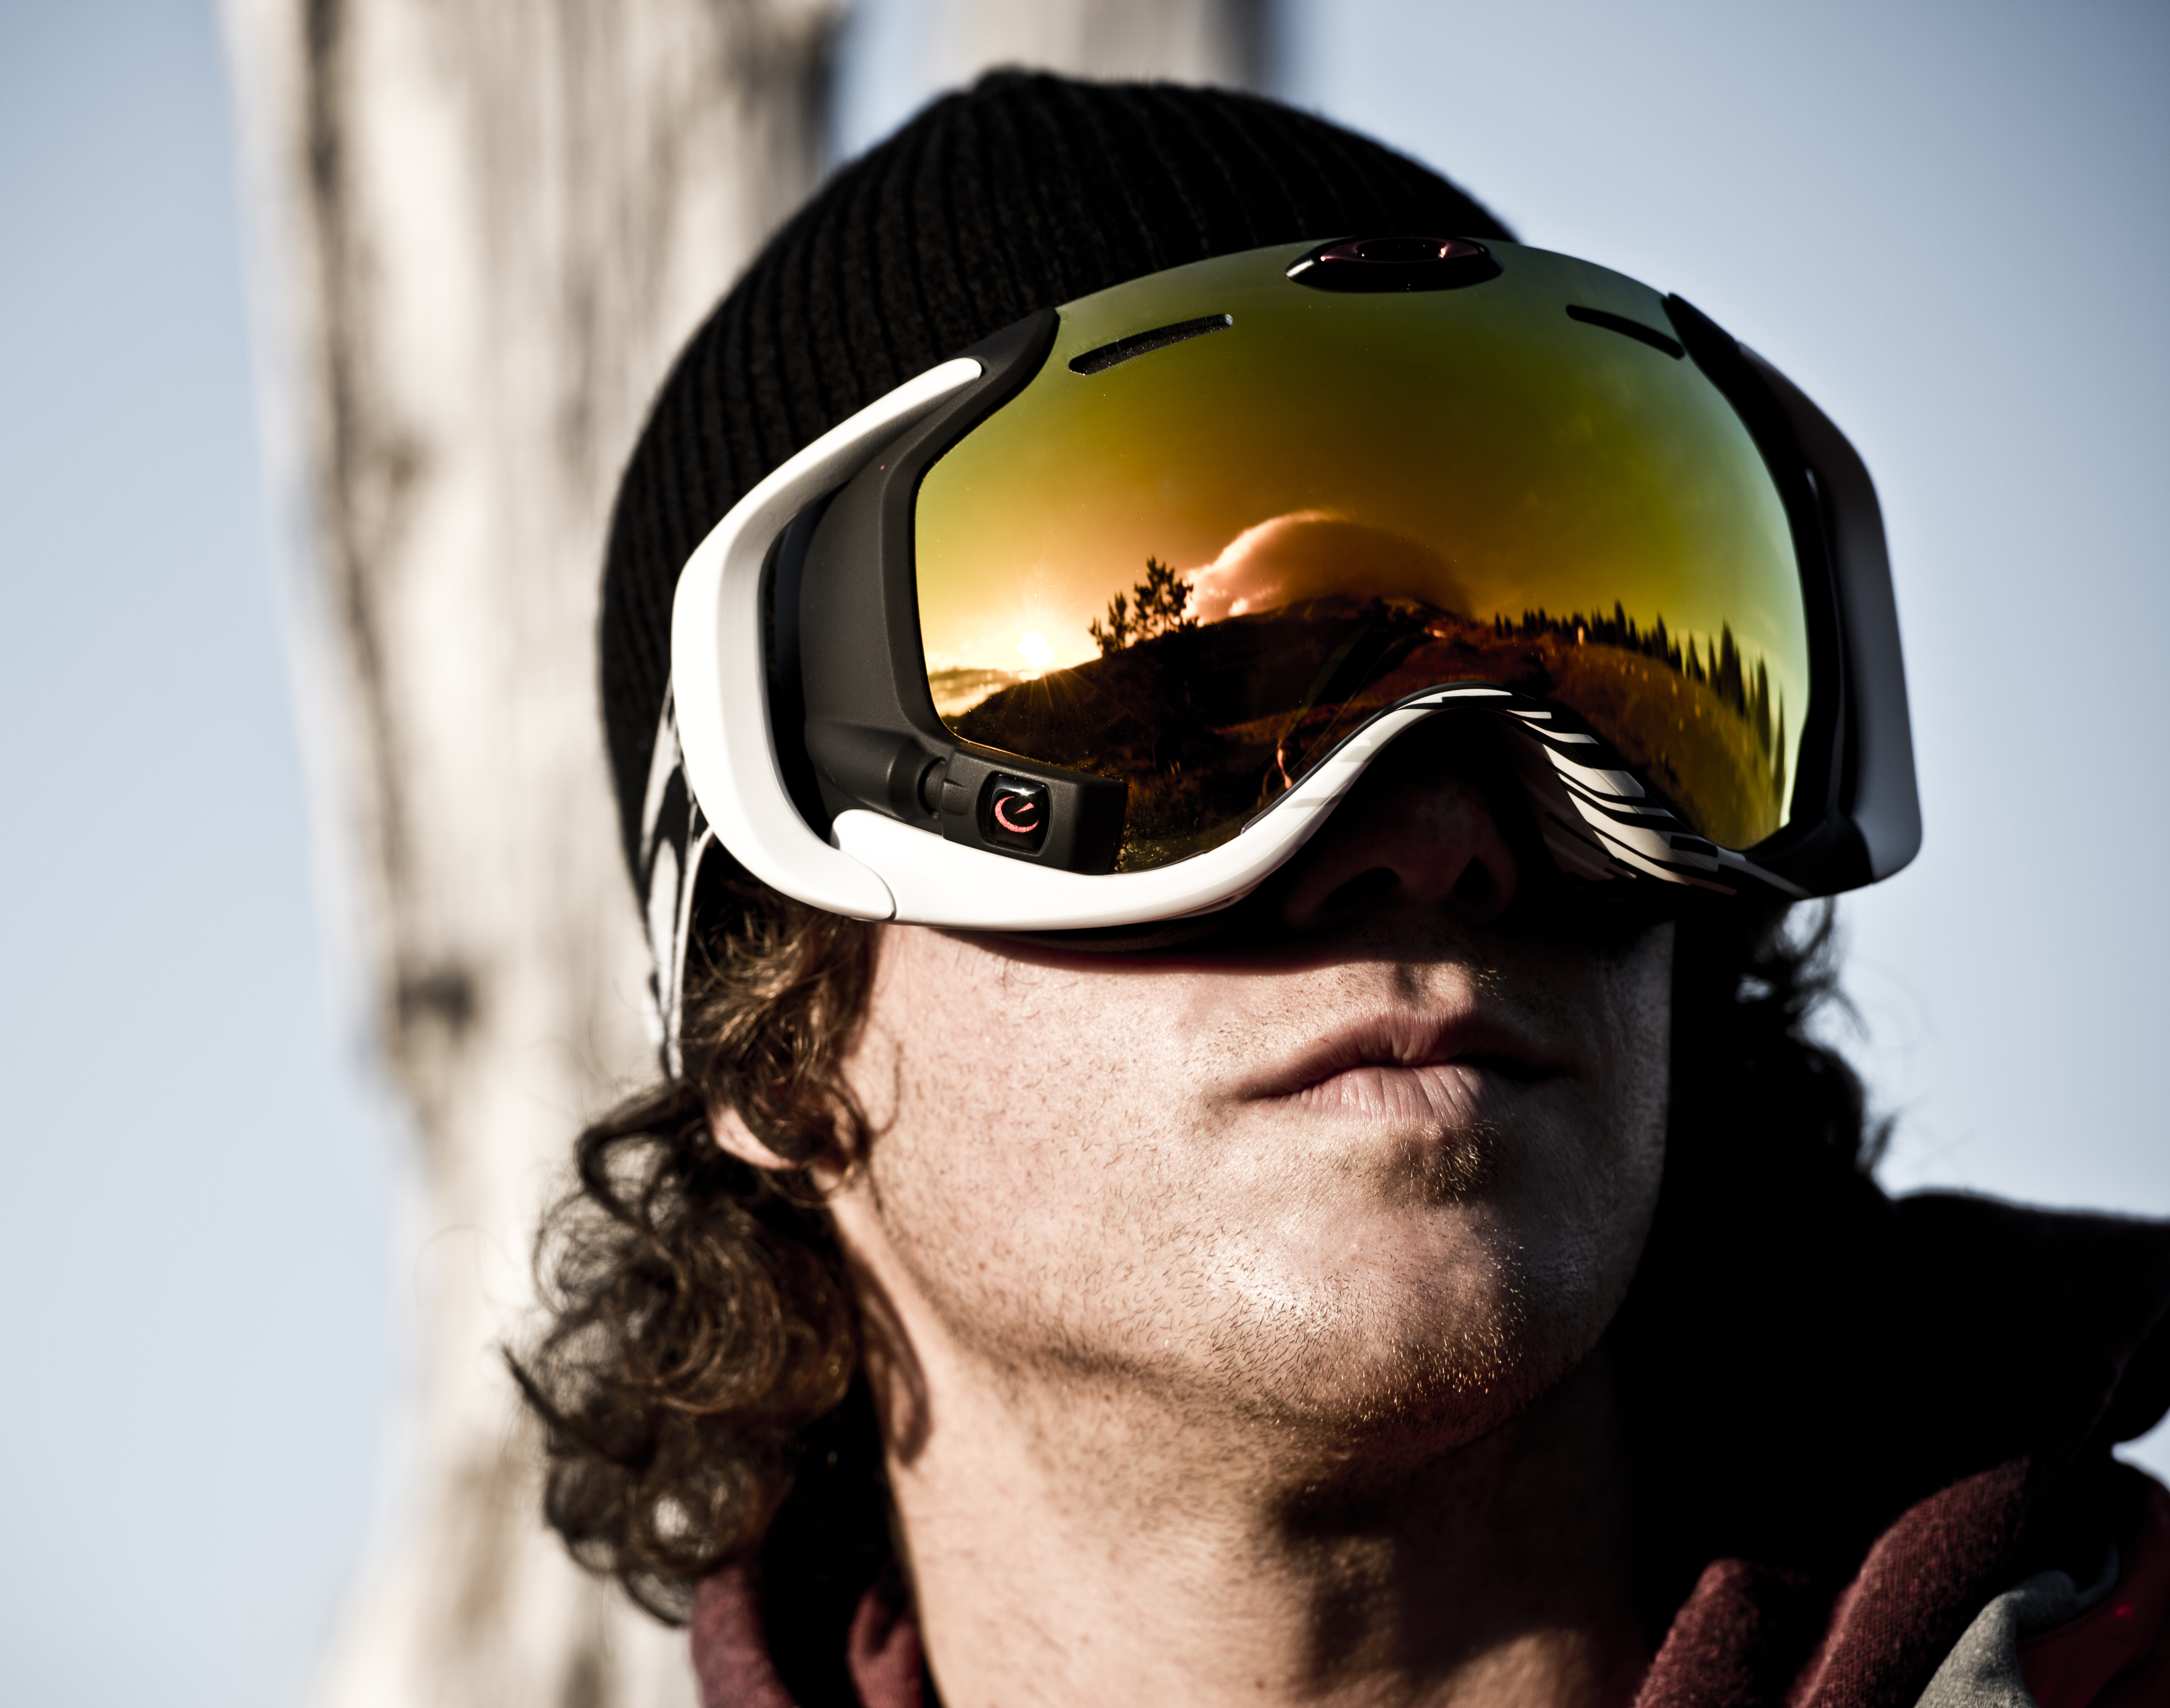 oakley goggles with heads up display